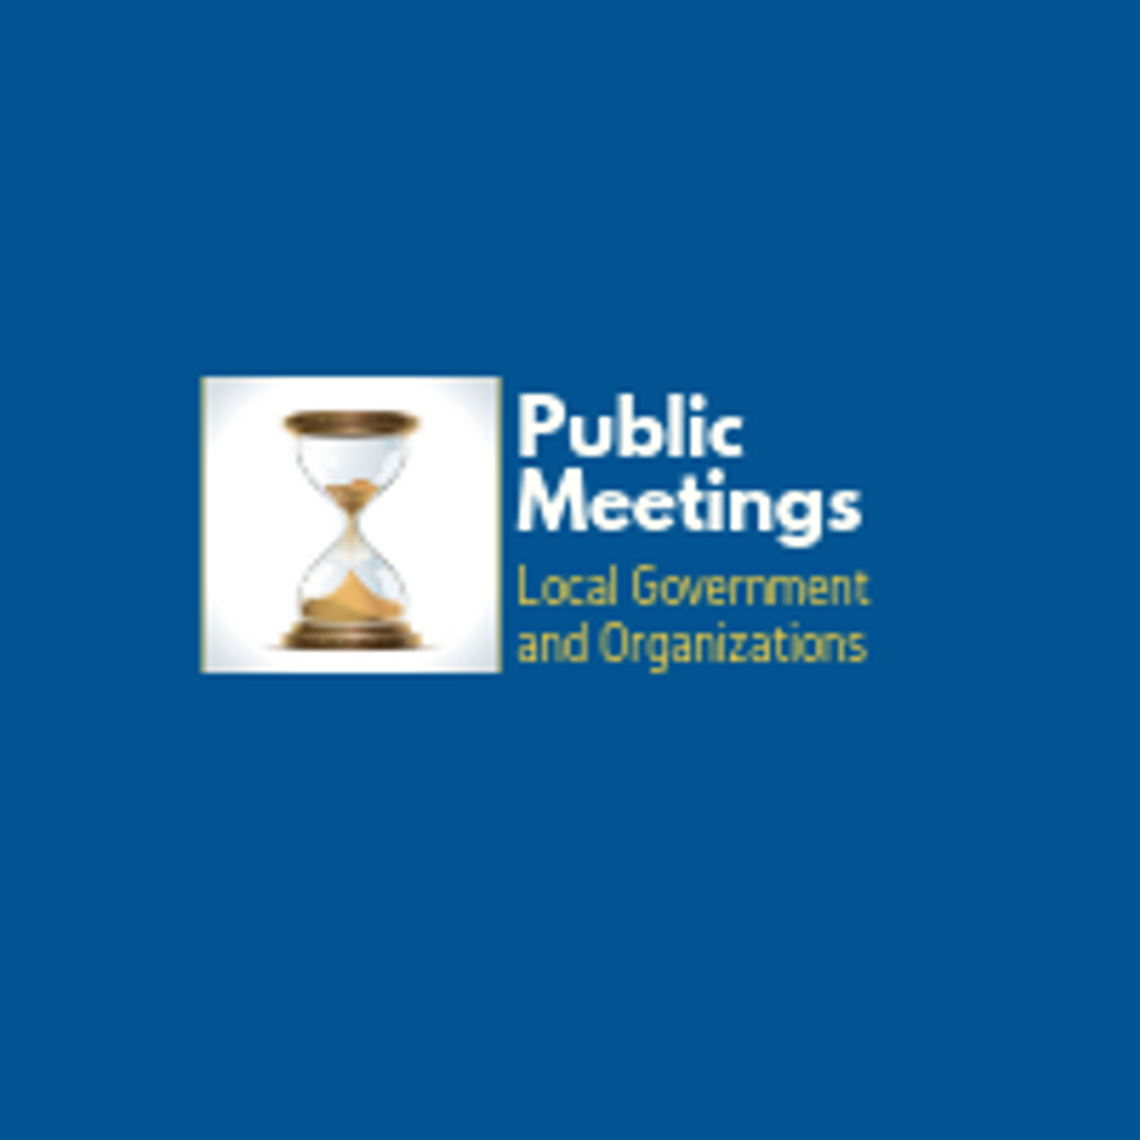 Public meetings this week - March 16th